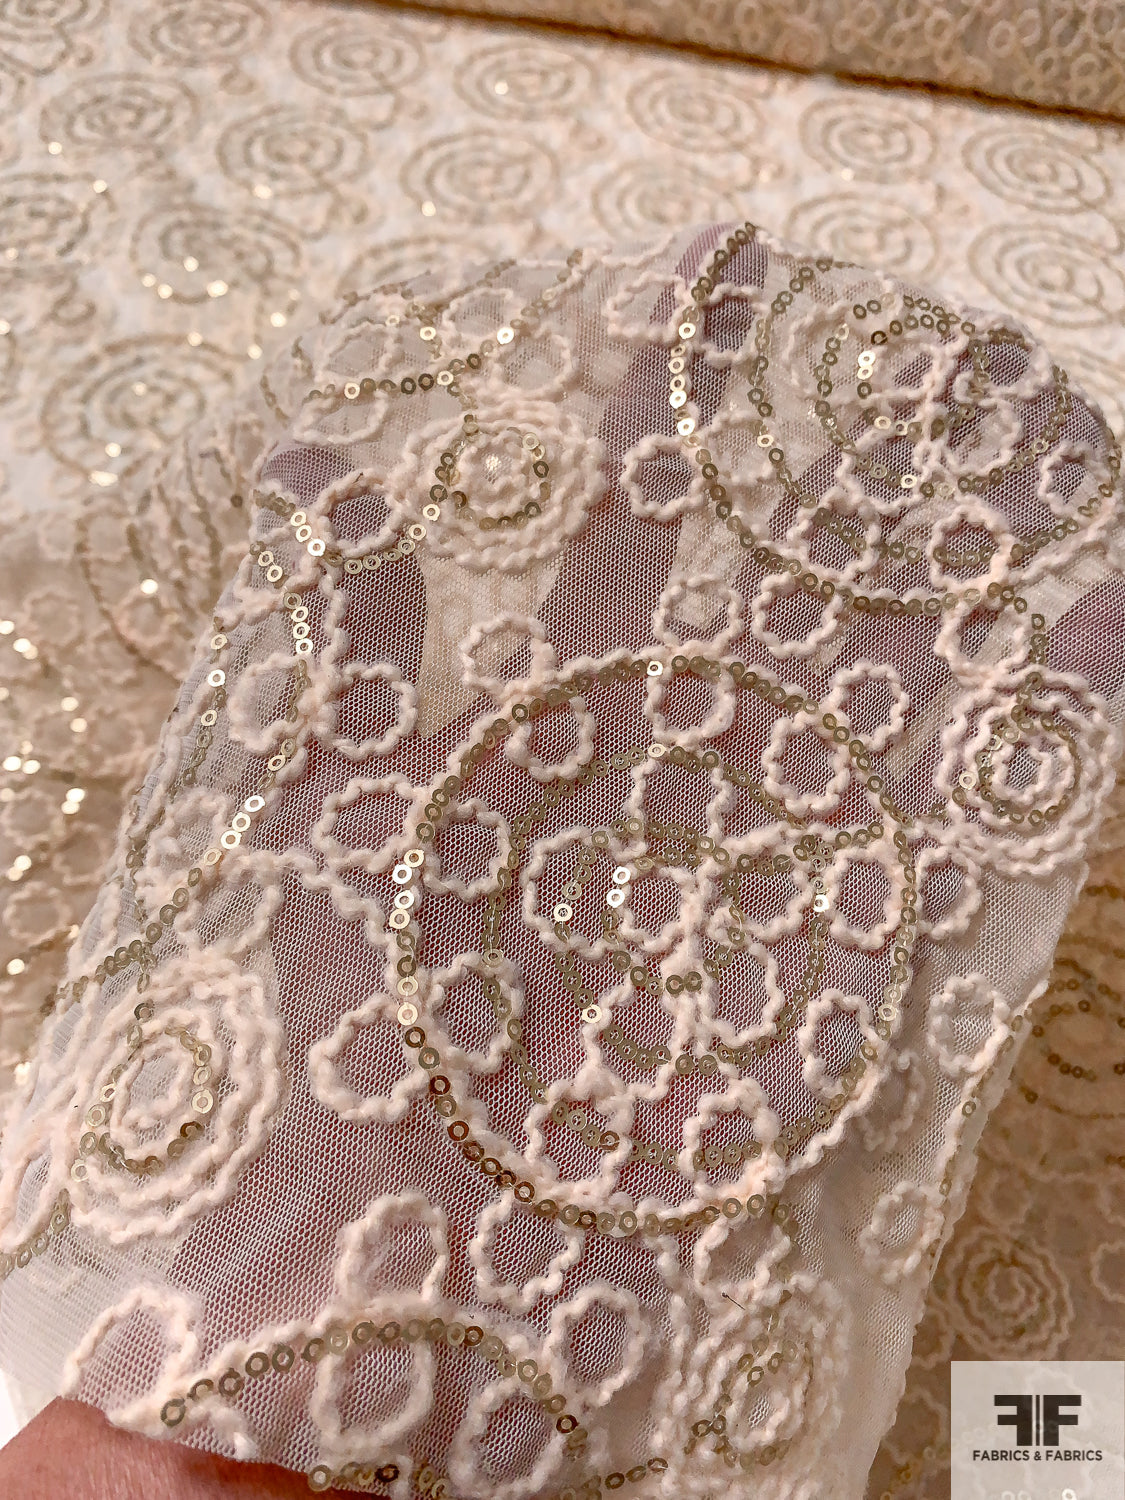 Netting with Circular Yarn Embroidery and Sequins - Ivory White / Light Gold